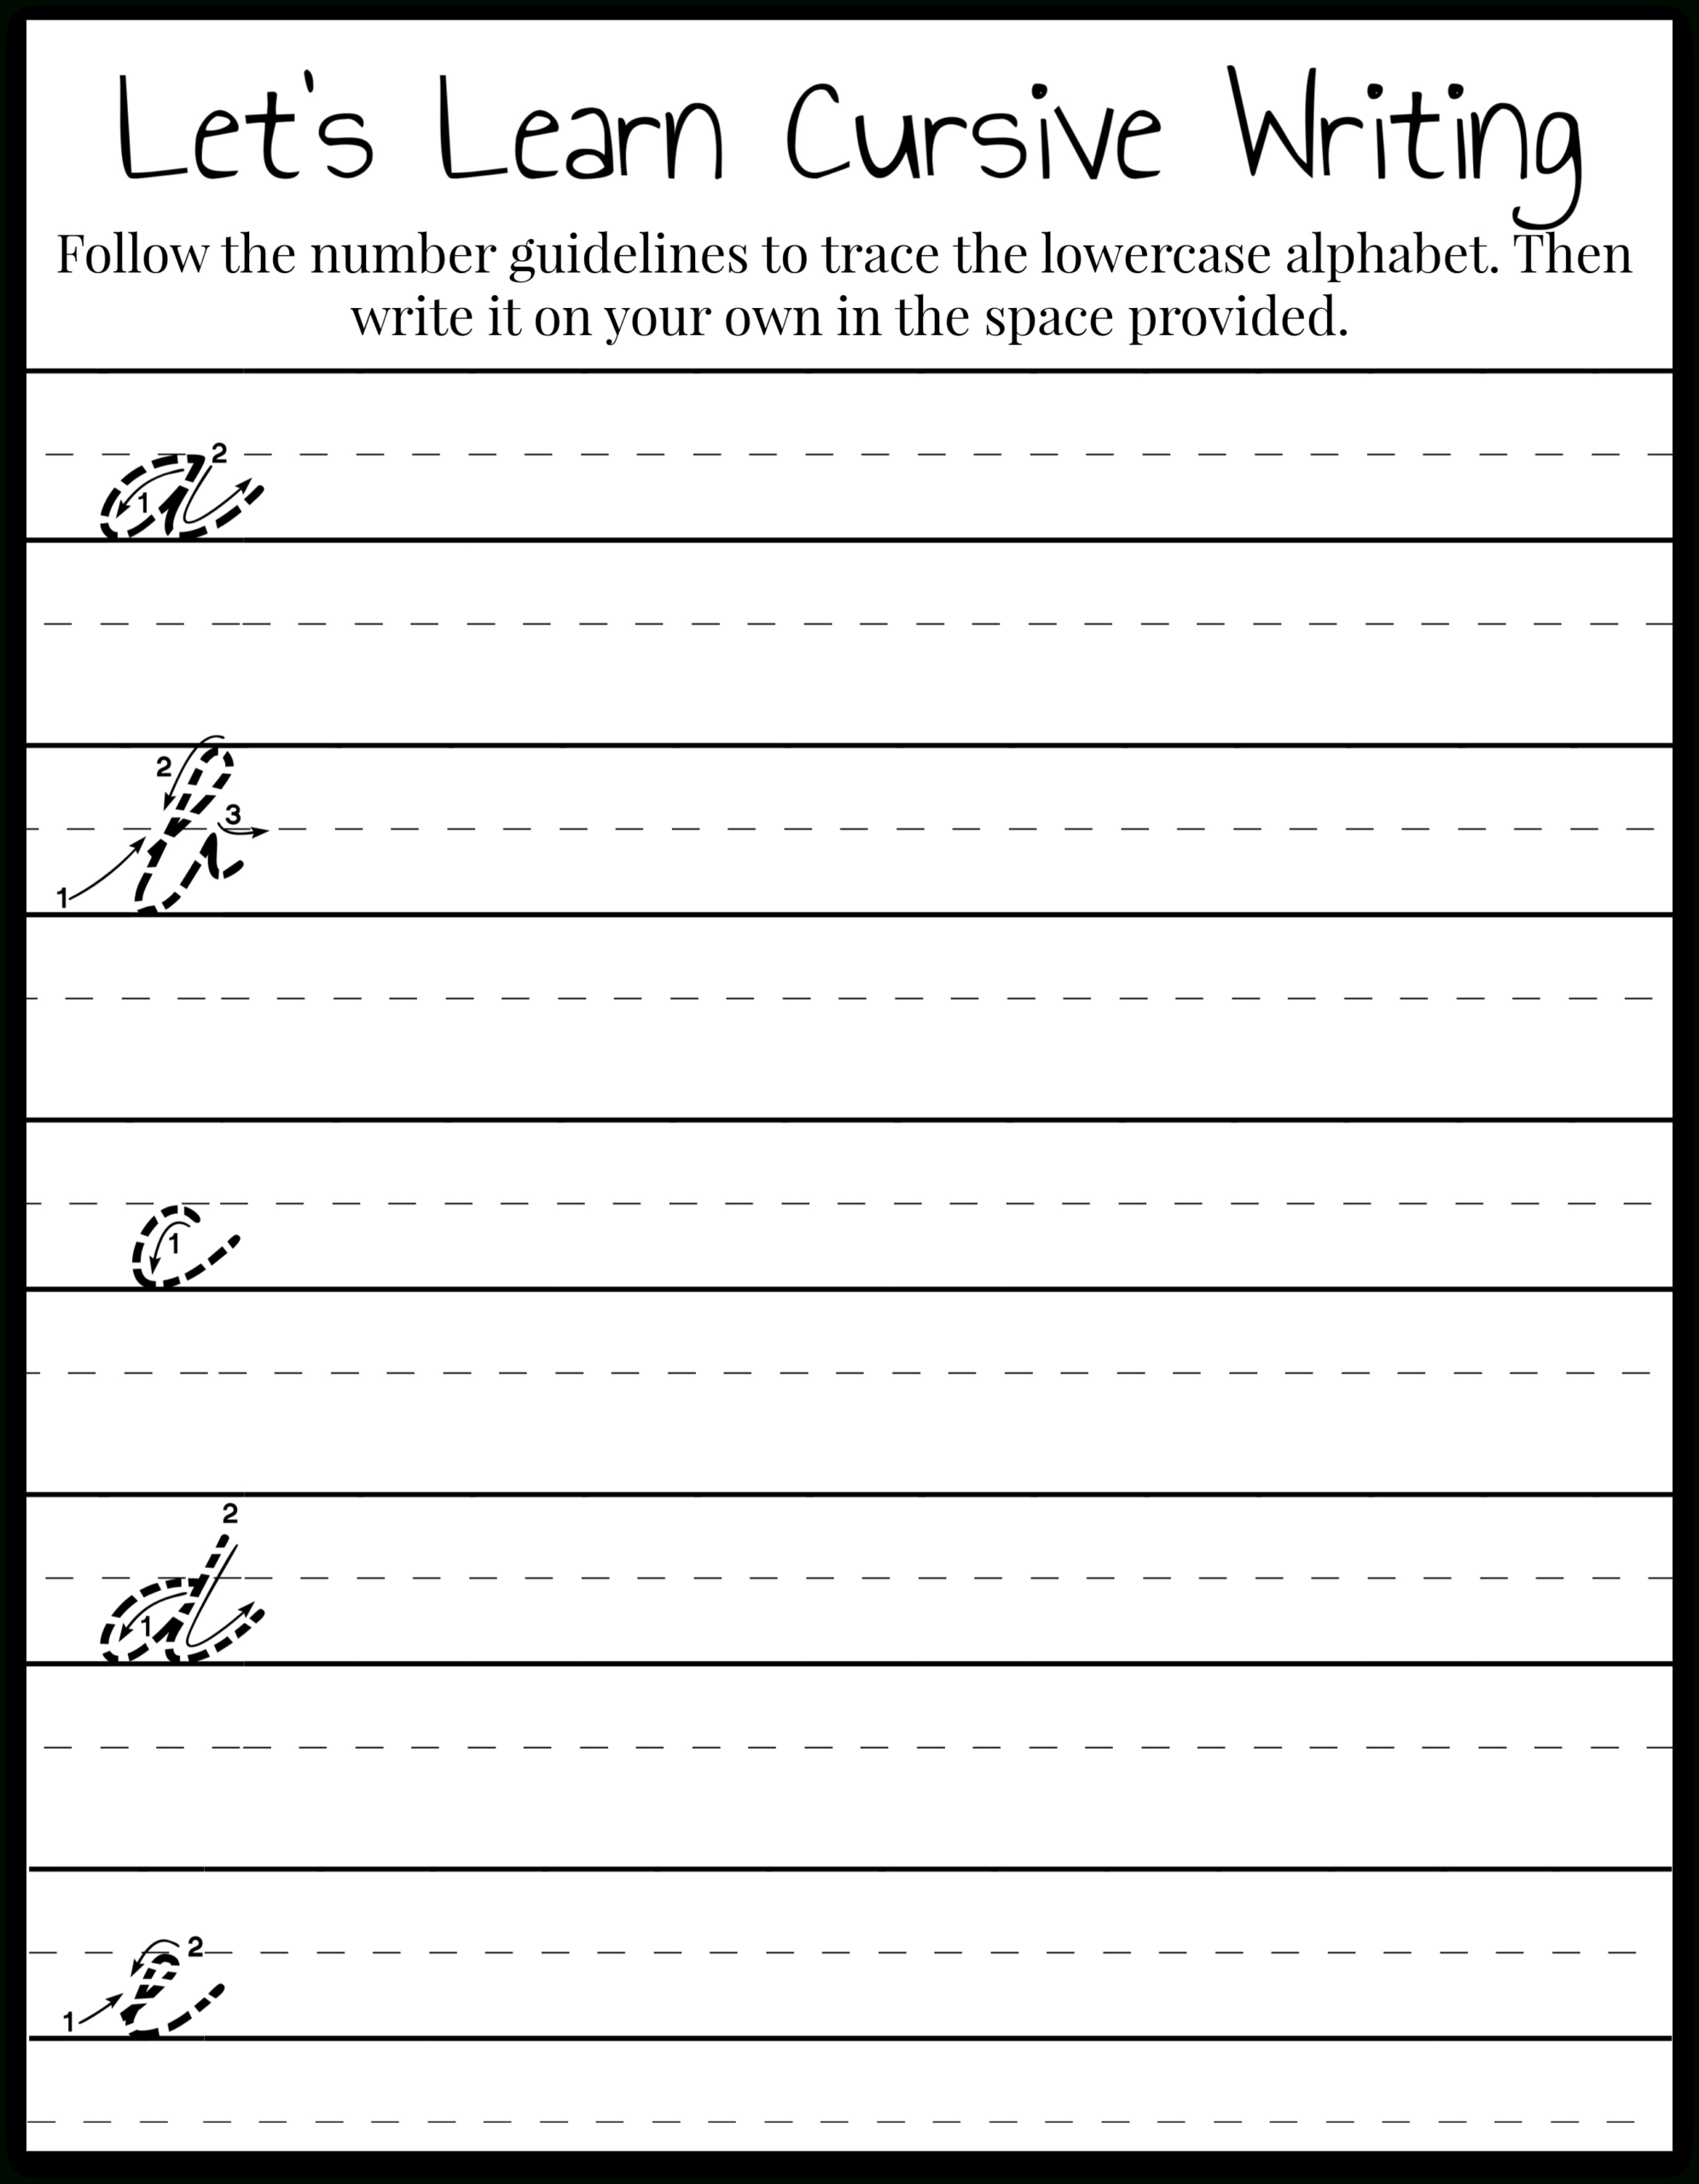 Learning Cursive Writing For Kids - Extreme Couponing Mom intended for Name Tracing App Cursive